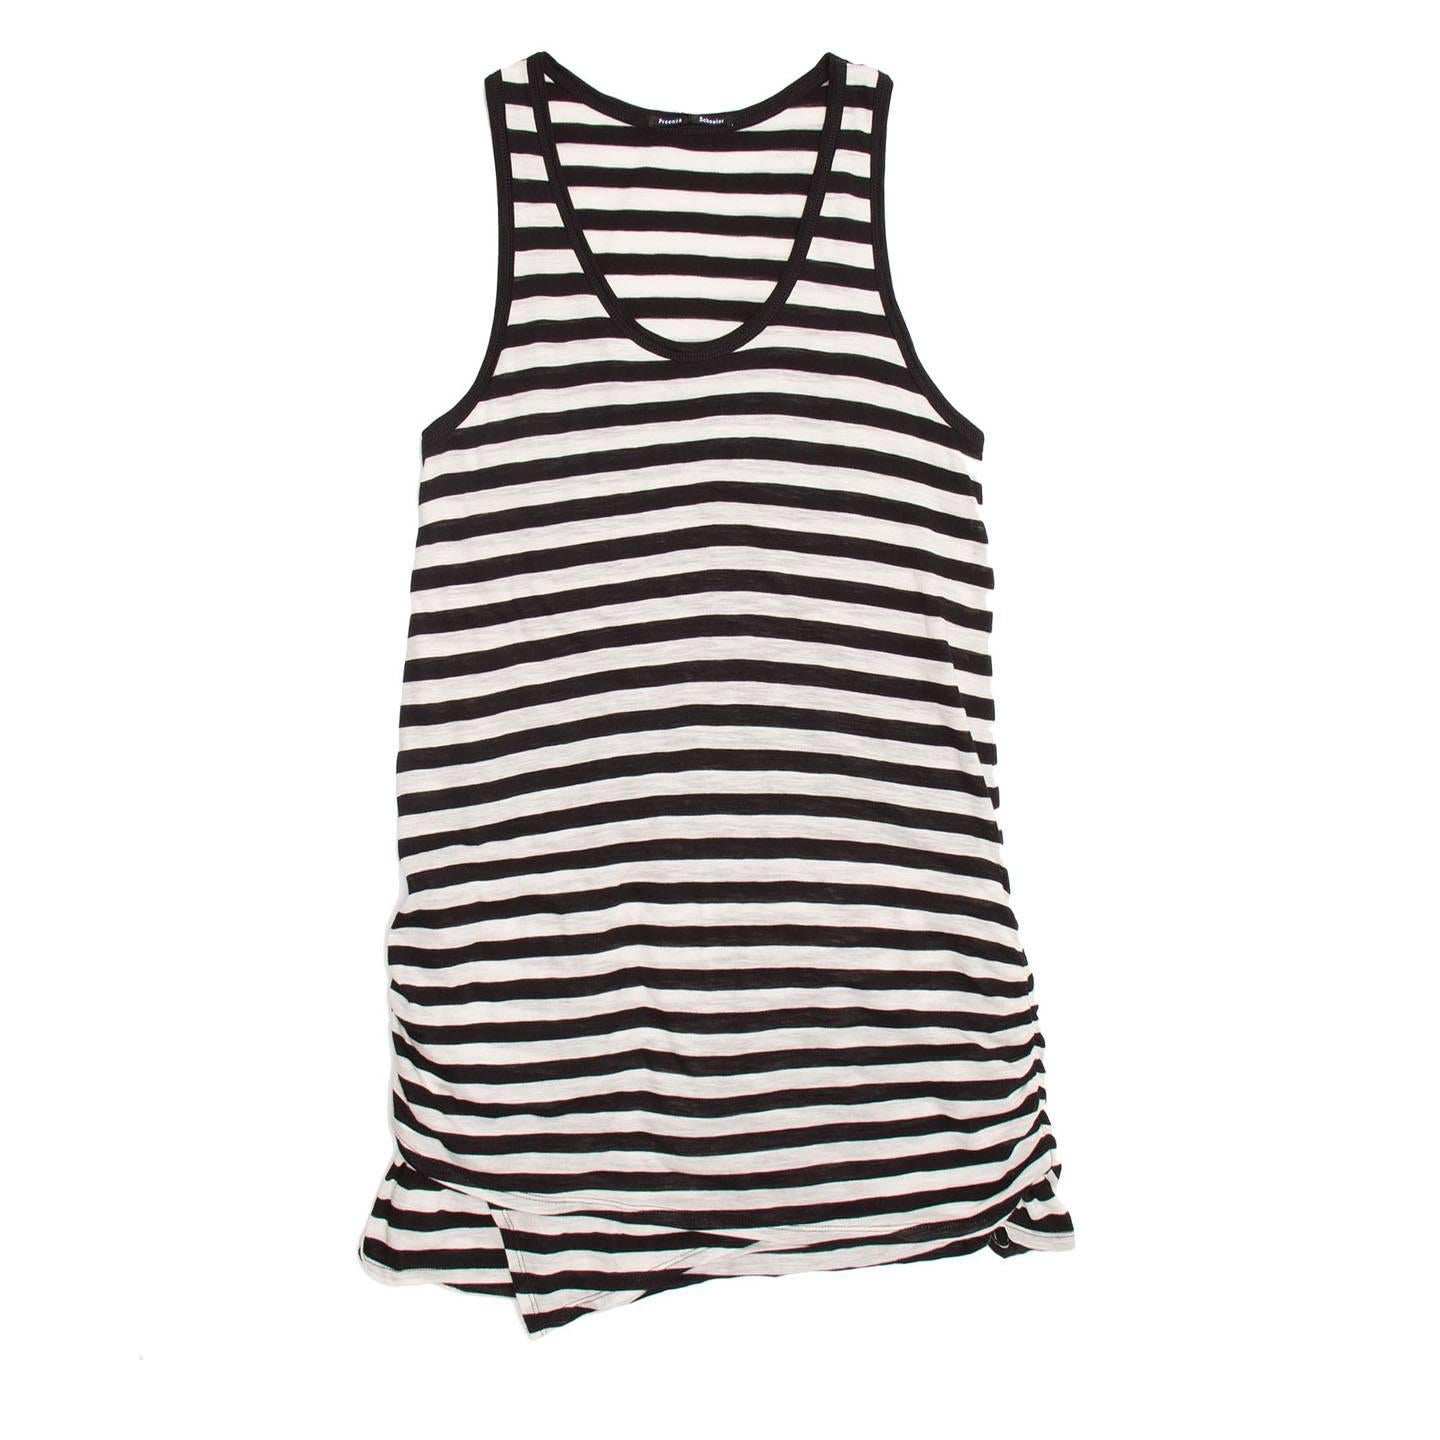 Proenza Schouler black and ivory striped jersey mini tank dress or long top. Shirring at side seam and asymetrical panel detail at hem. New with Tags.

Size  L Universal sizing

Condition  Excellent: new with tags